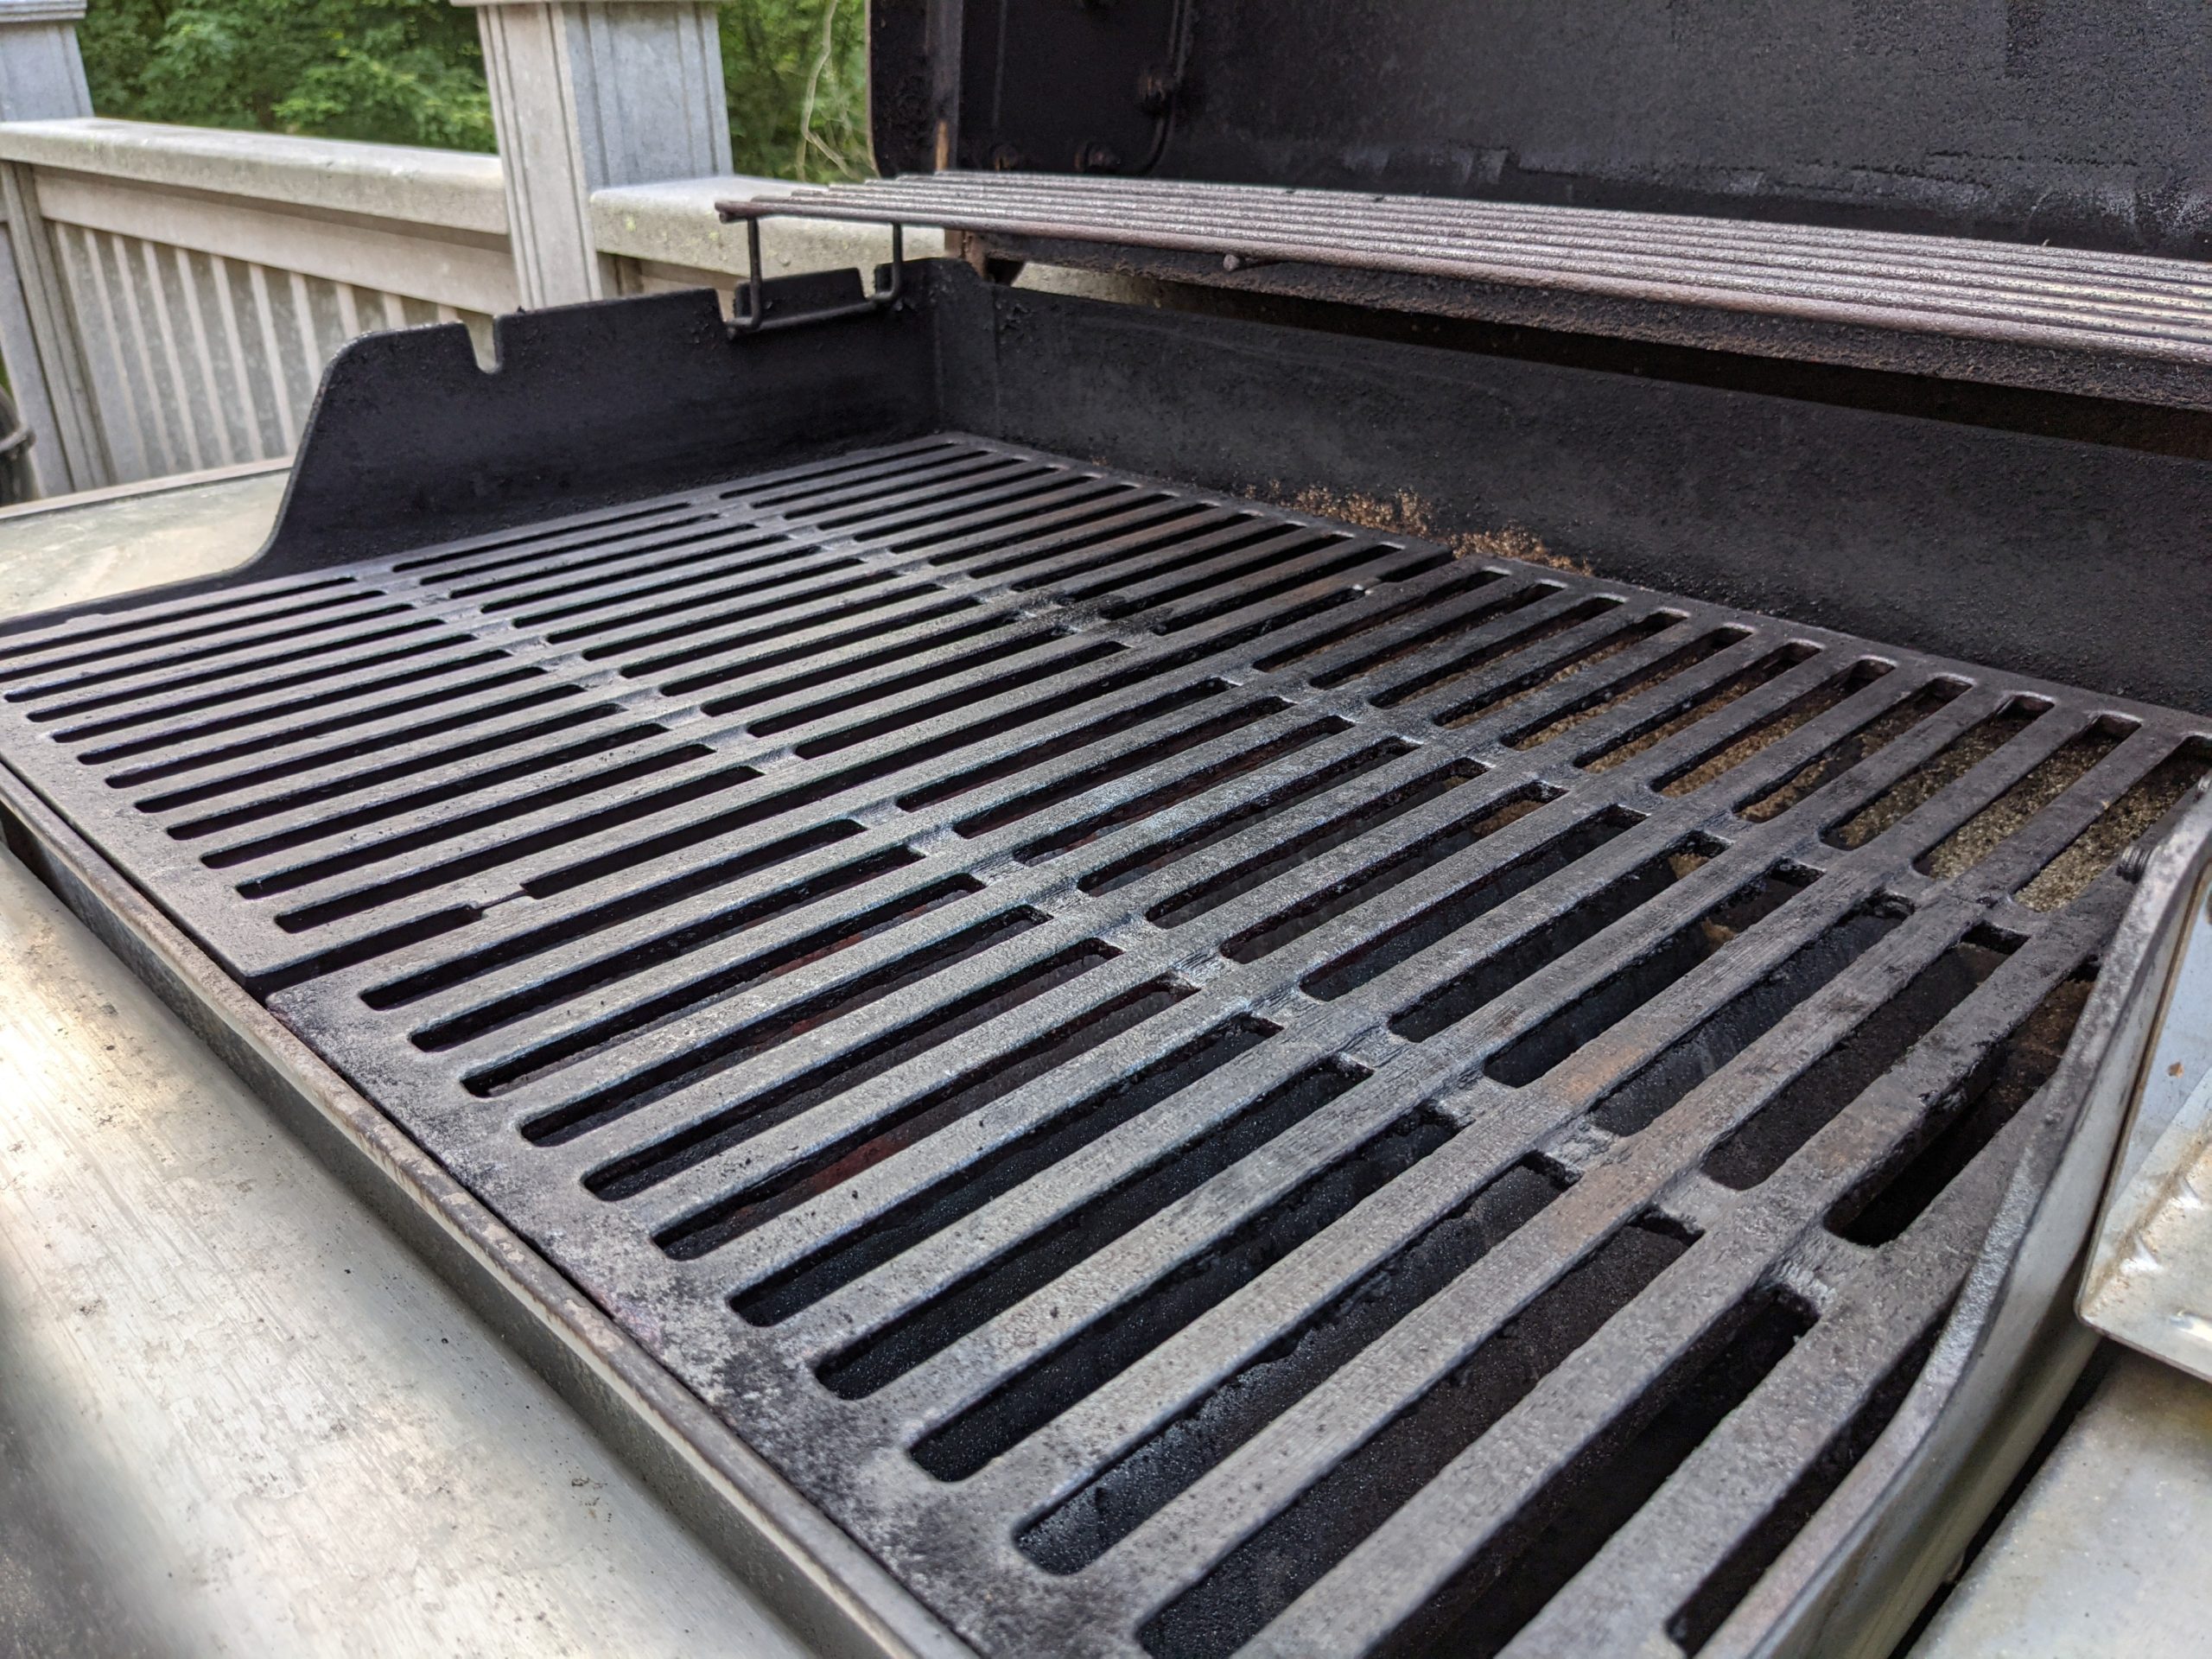 Keen eyes will spot a bit of hot dog fat on the left grate. It can't be helped. (Photo: Sam Bithoney)